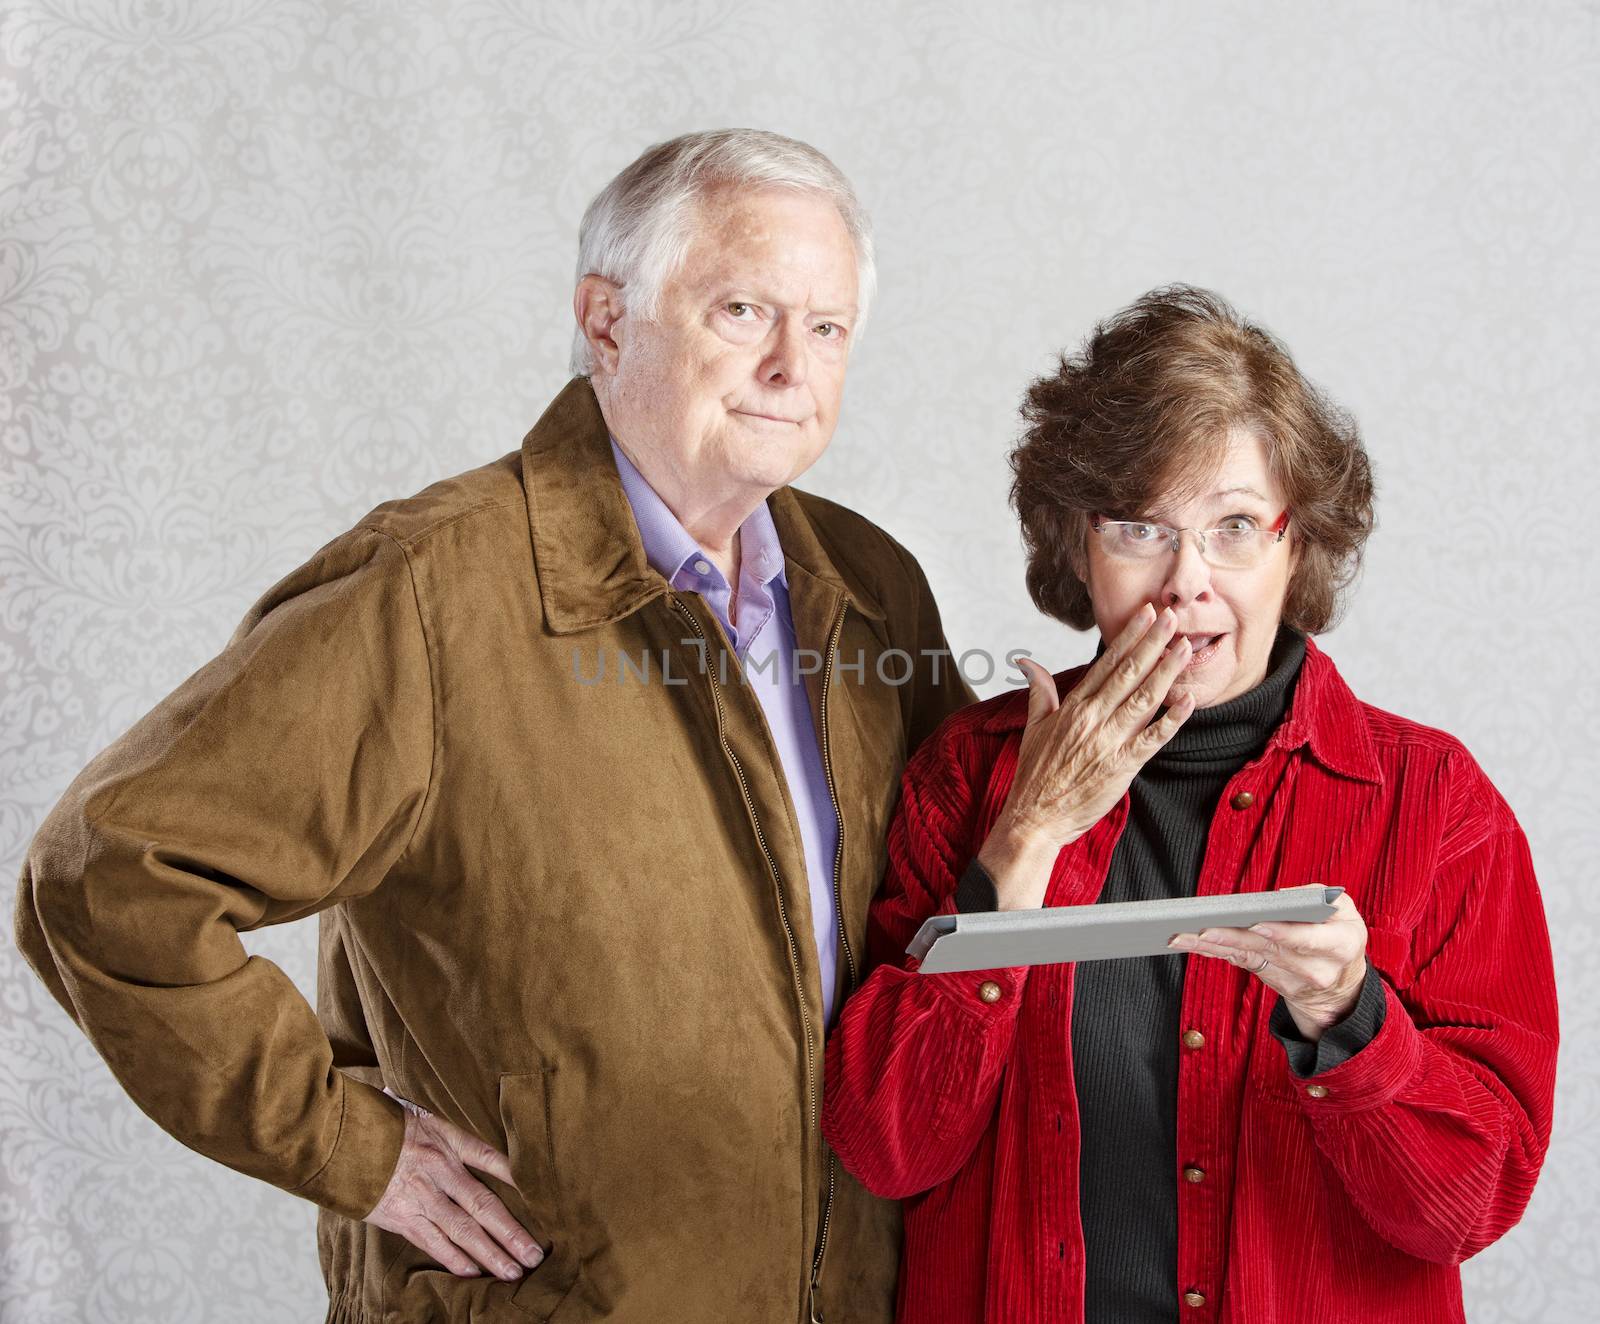 Suspicious man and embarrassed woman holding tablet